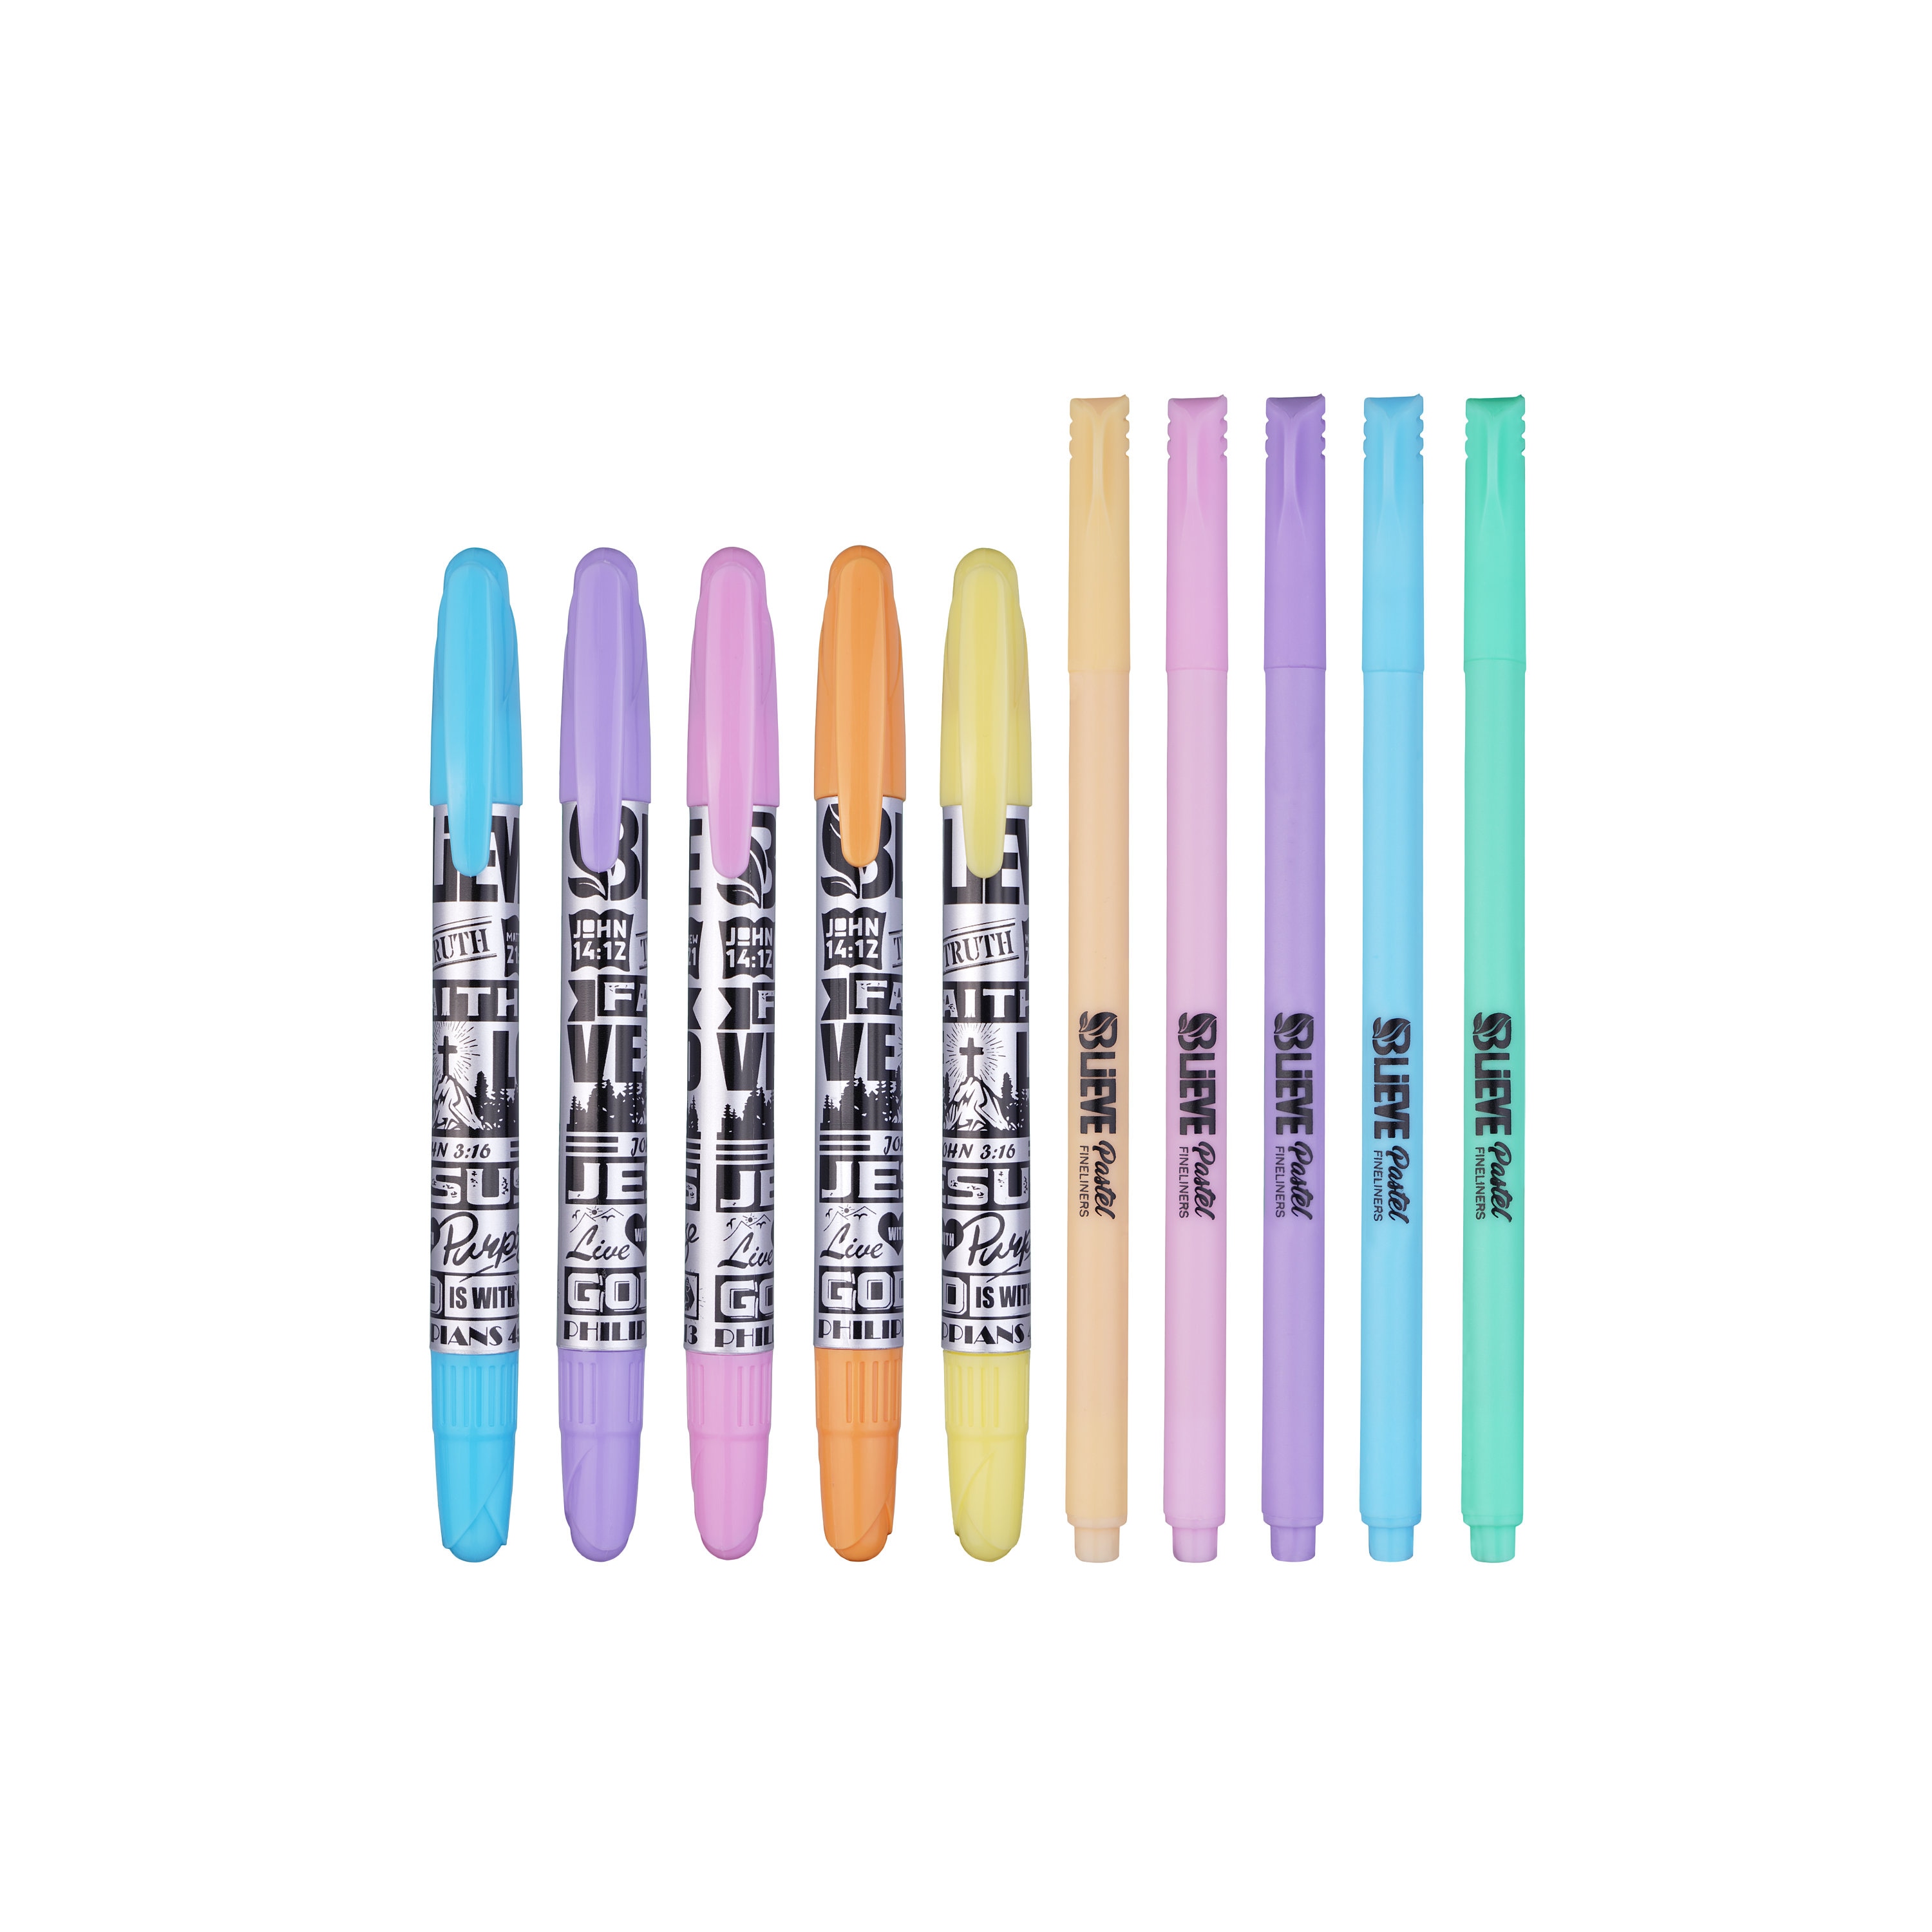 6 No Bleed or Smear Bible Safe Gel Stick Highlighters, Bible